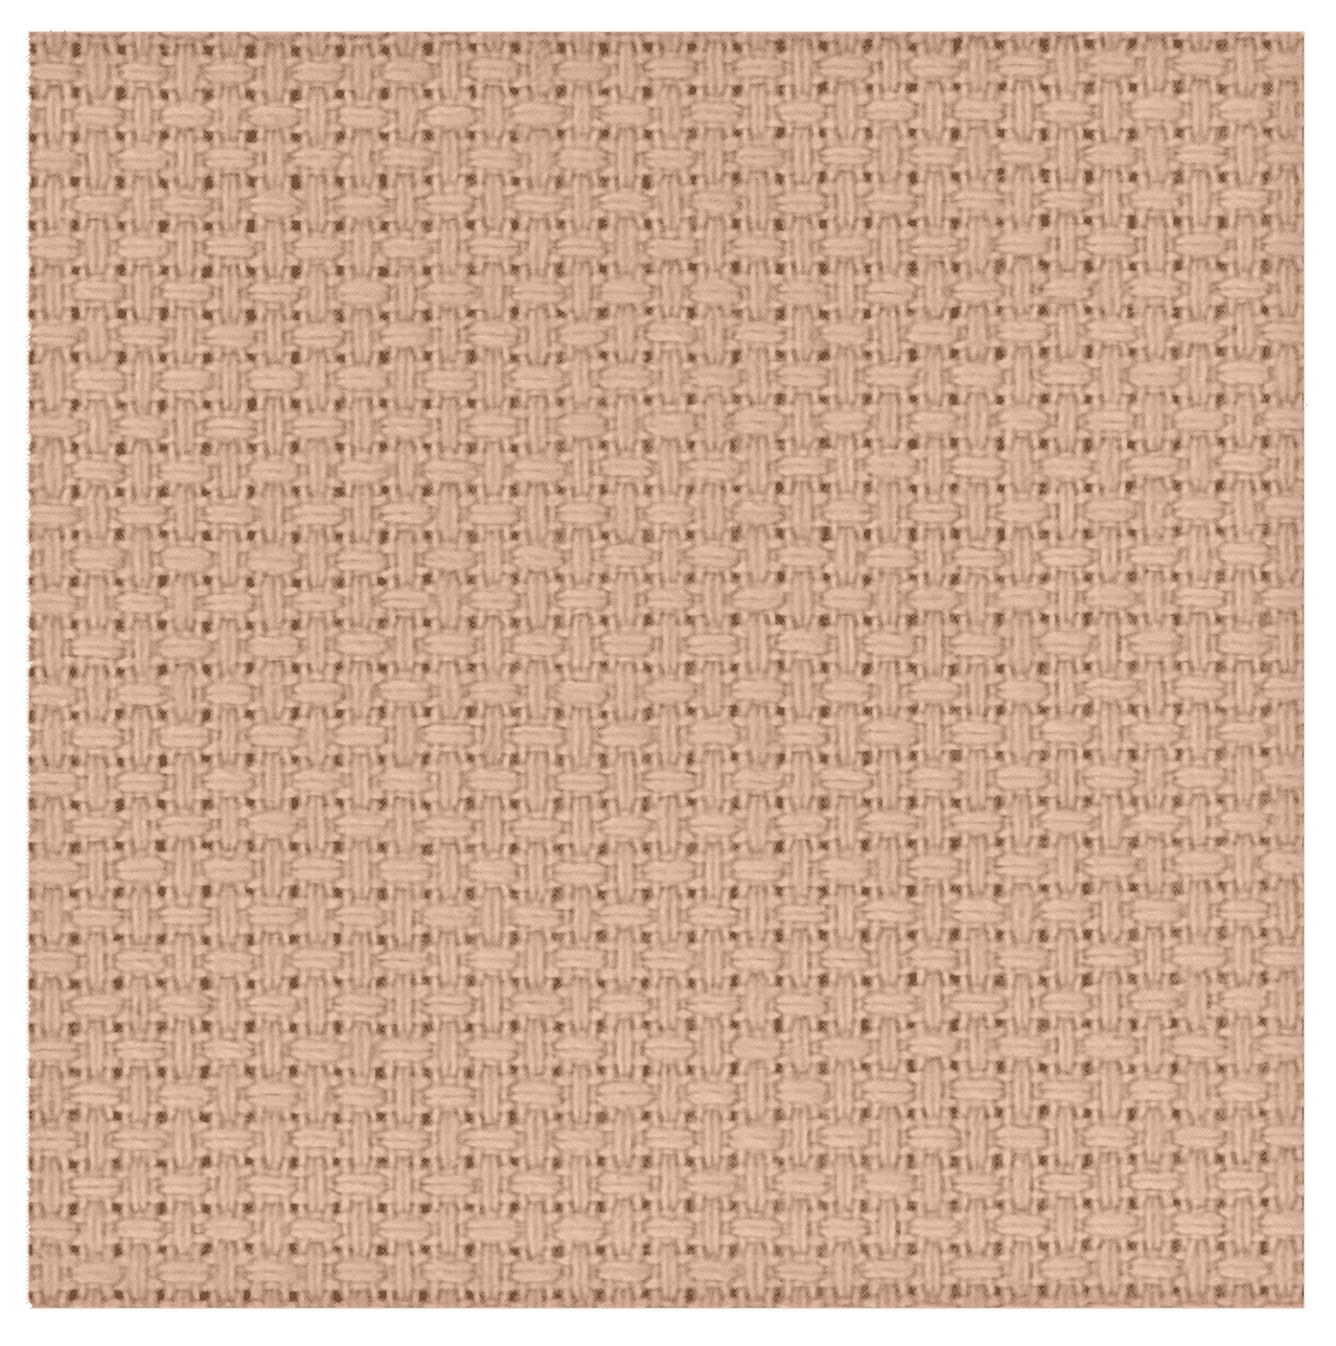 Essentials By Leisure Arts Aida Cloth, 14 count, 30 x 36, Taupe cross  stitch fabric for embroidery, cross stitch, machine embroidery and  needlepoint